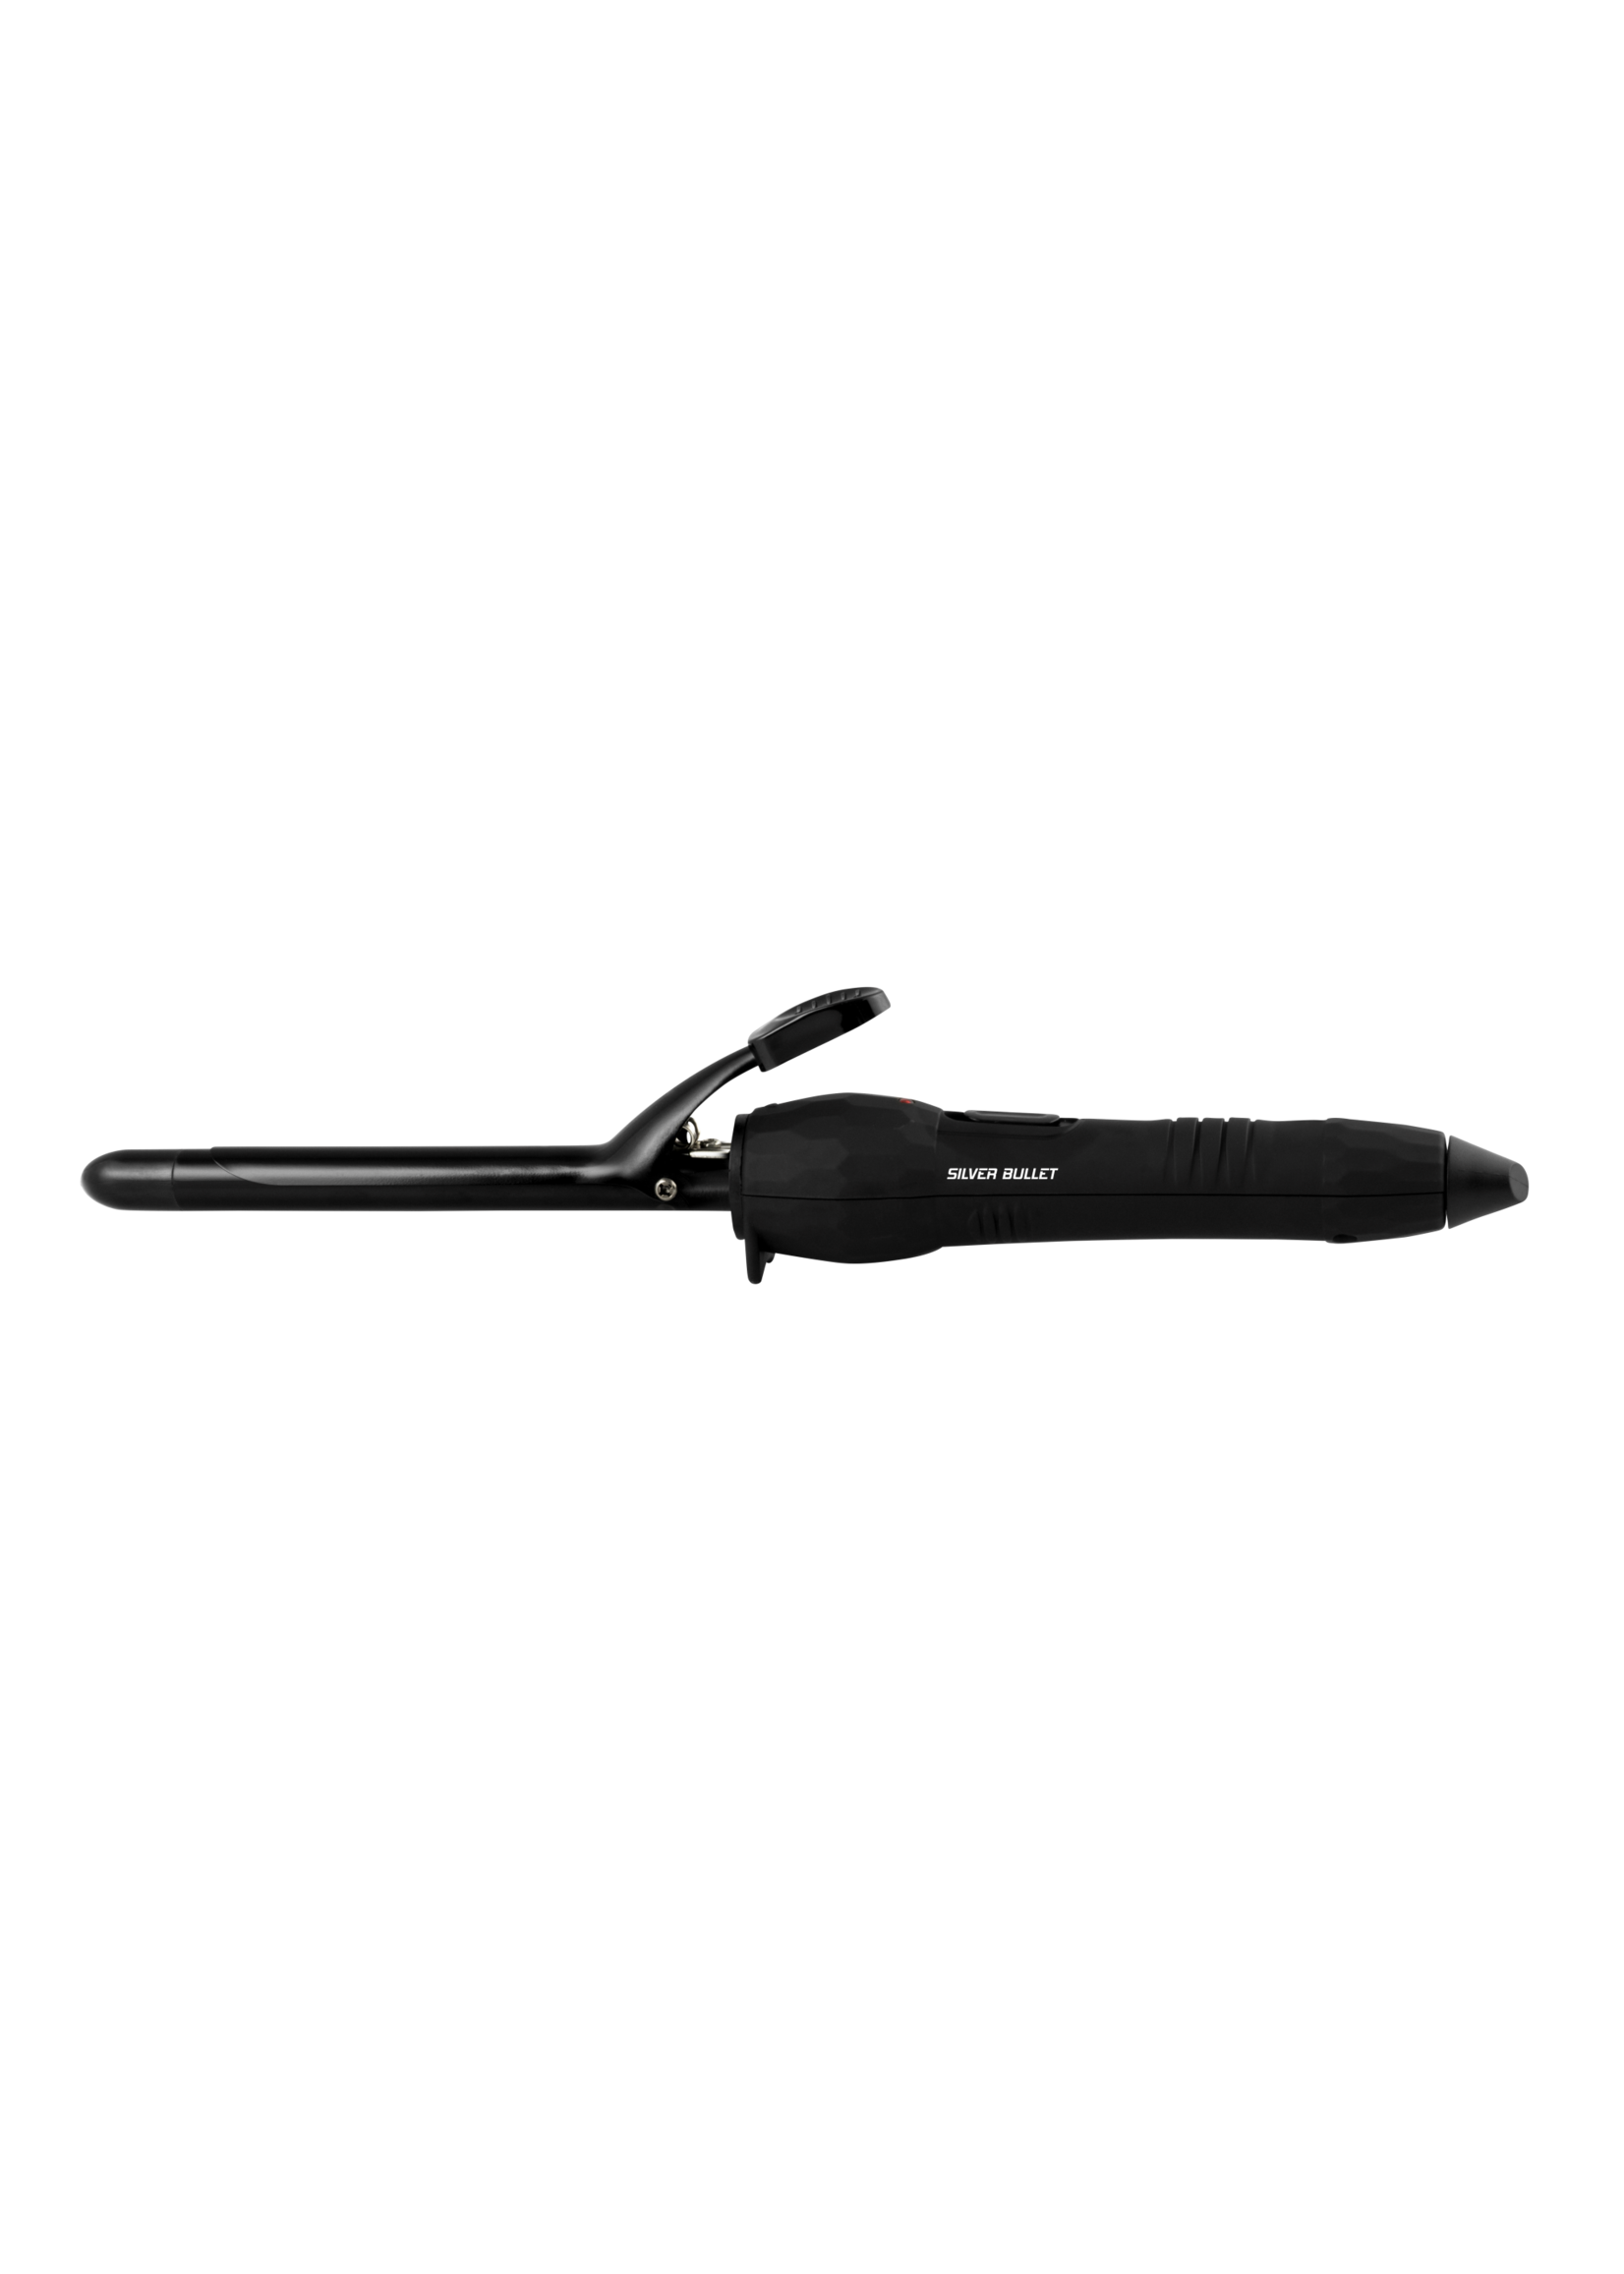 Silver Bullet Silver Bullet City Chic Ceramic Curling Iron - 13mm